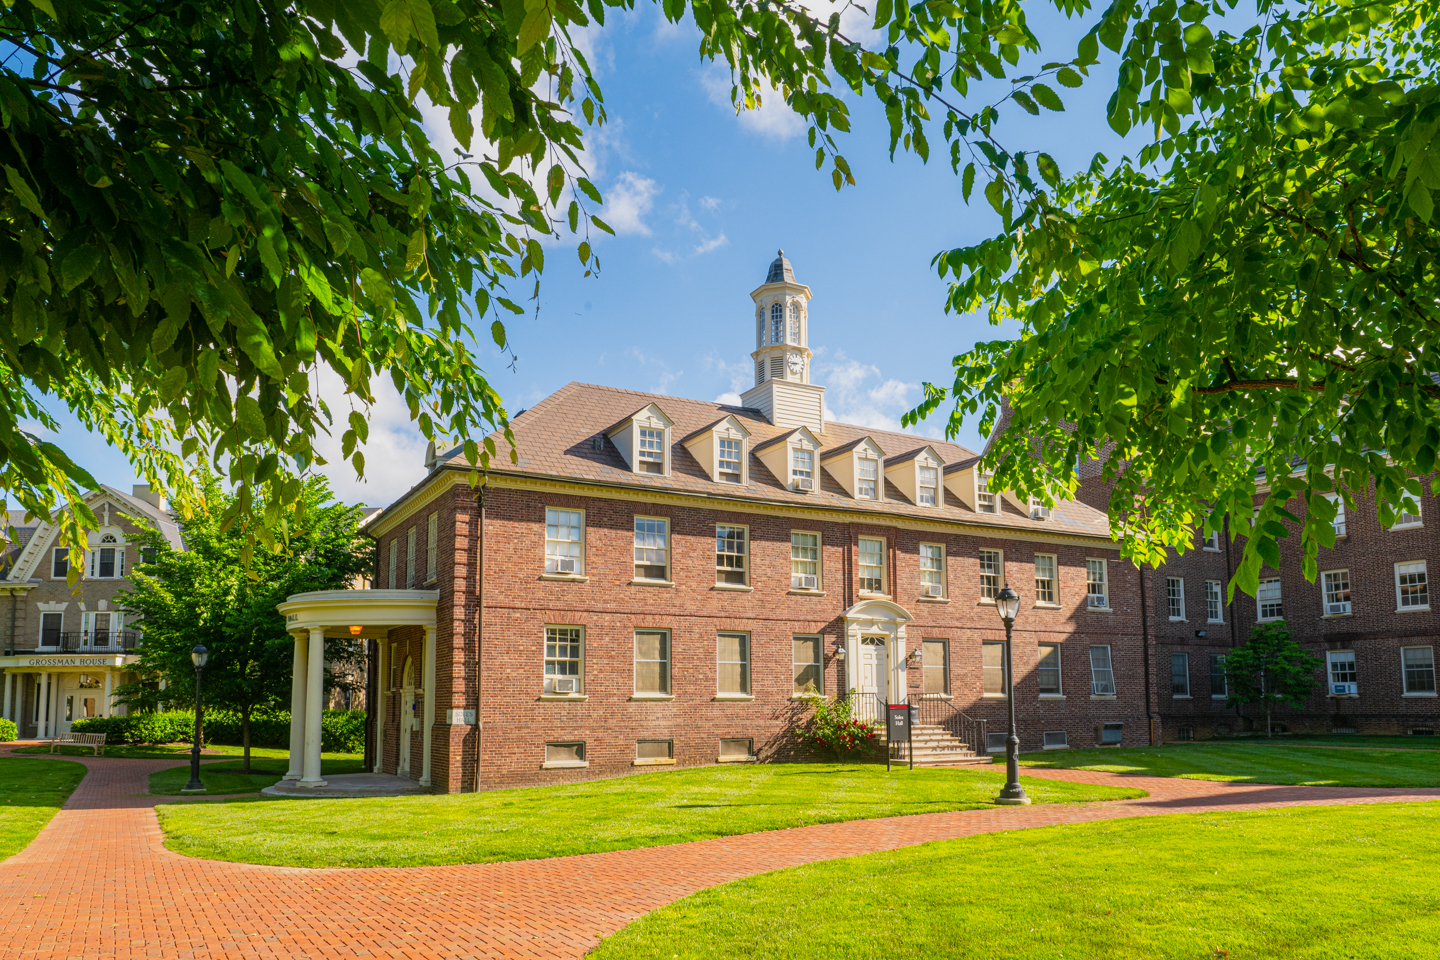 A brick building with a cupola is framed by green leaves and set against a blue sky. In front of the building is a brick path and grassy lawn. 